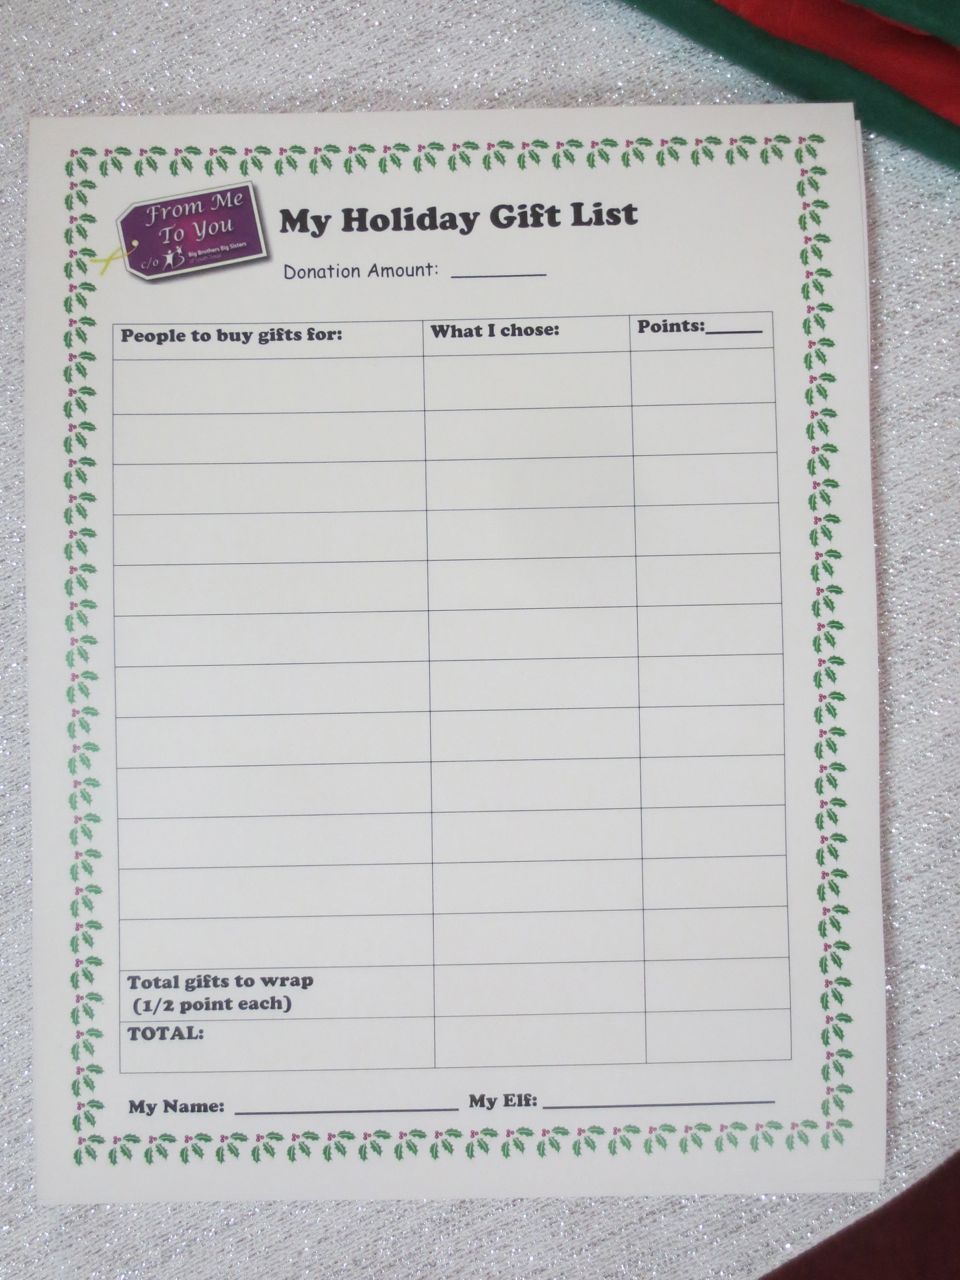 Gift list at From Me To You c/o Big Brothers Big Sisters of South Texas | San Antonio Charter Moms